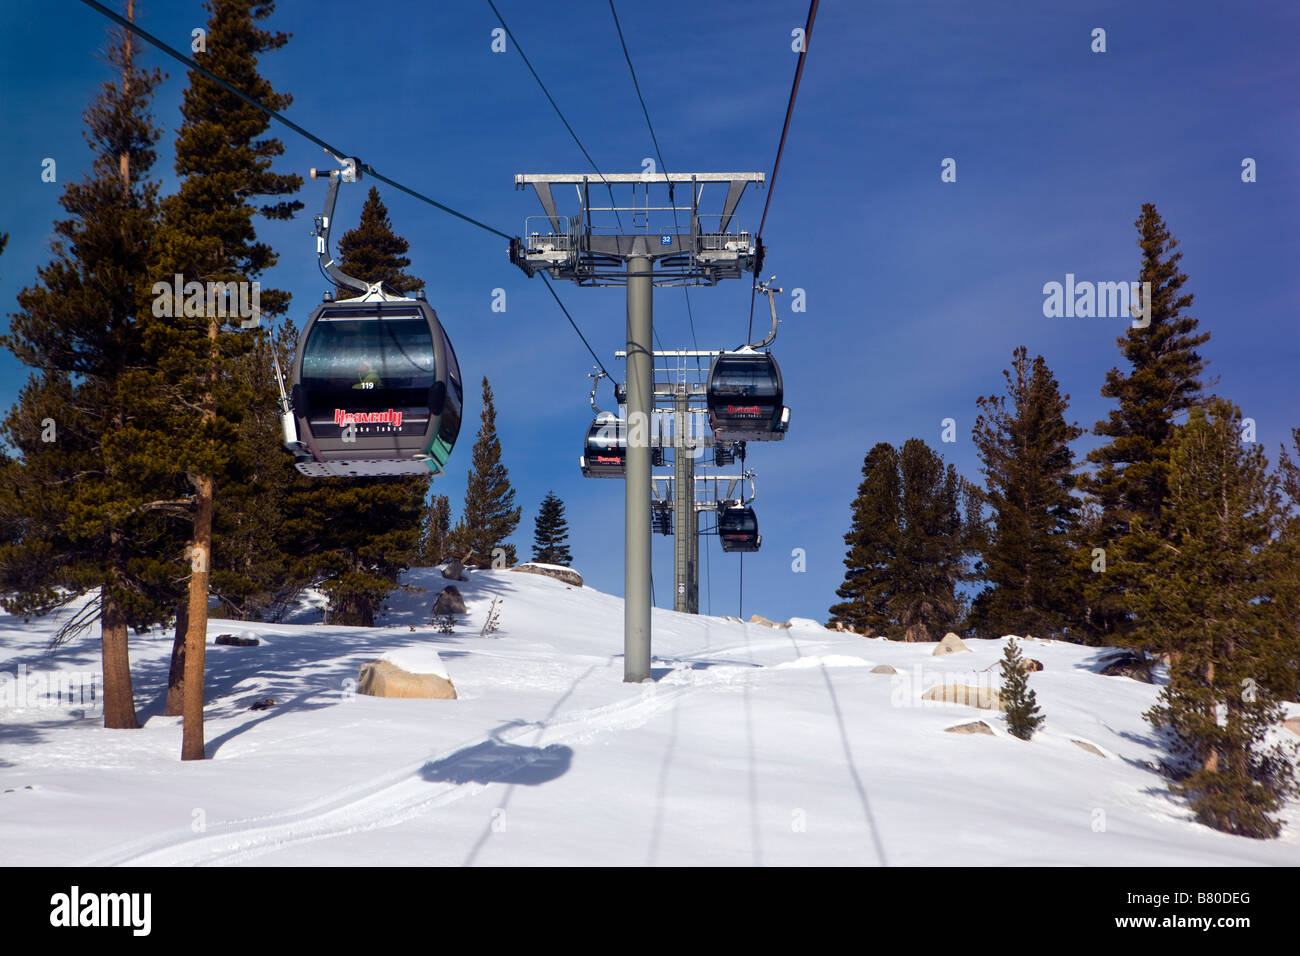 The Gondola at Heavenly takes skiiers and snowboards up the mountain from South Lake Tahoe California Stock Photo